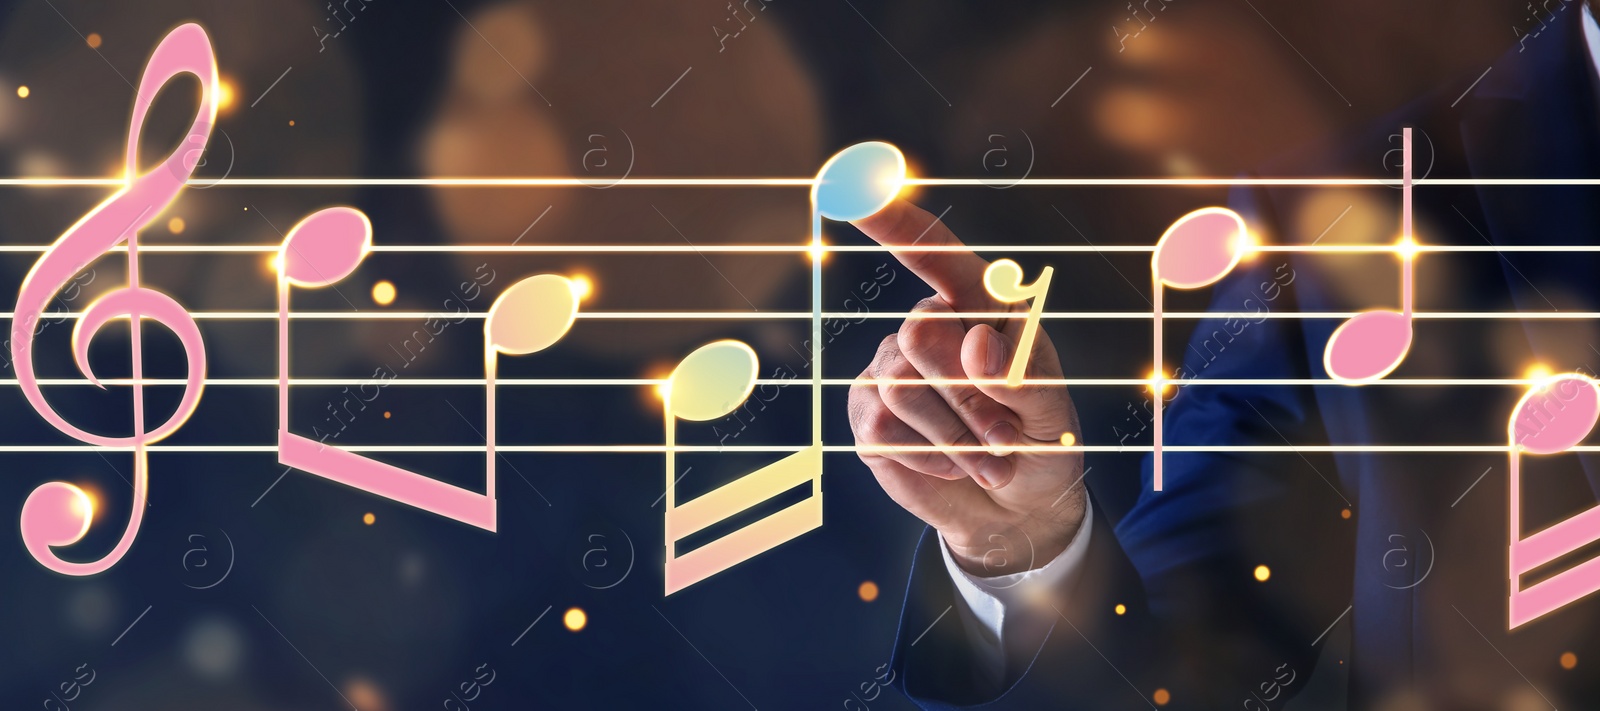 Image of Musician pointing at staff with music notes and symbols on color background, closeup. Banner design